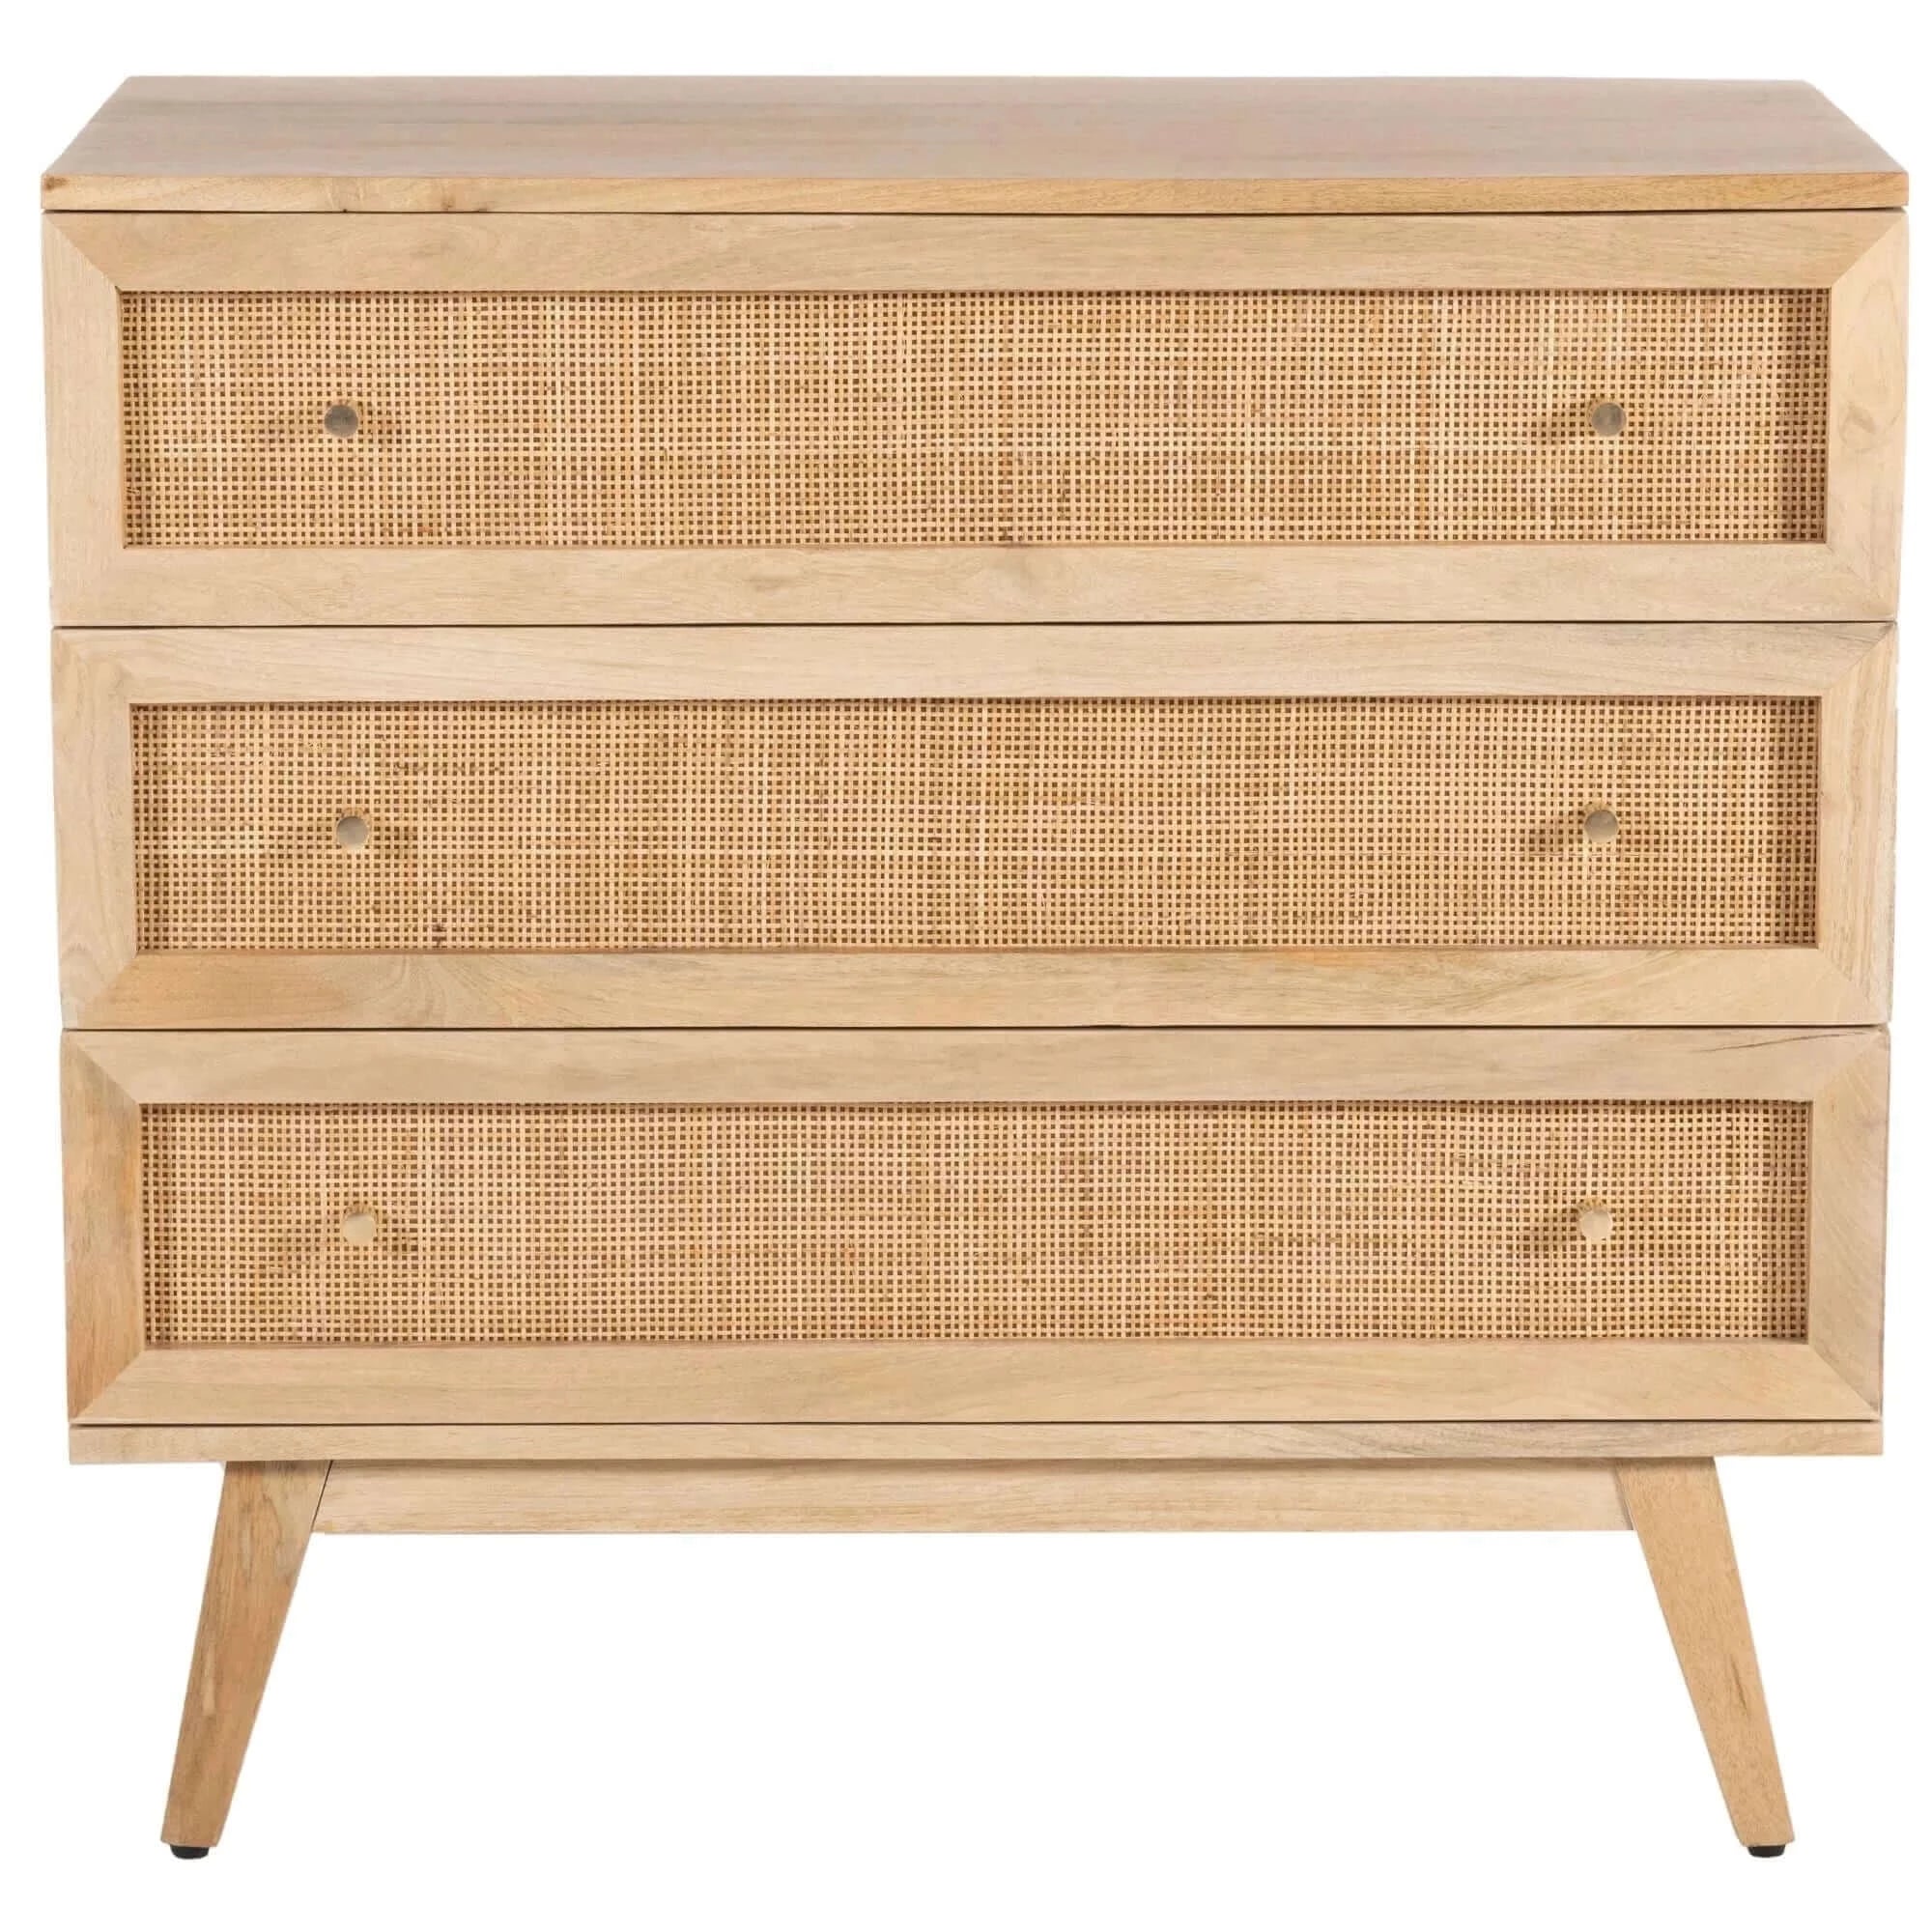 Olearia Storage Cabinet Buffet Chest of 3 Drawer Mango Wood Rattan Natural-Upinteriors